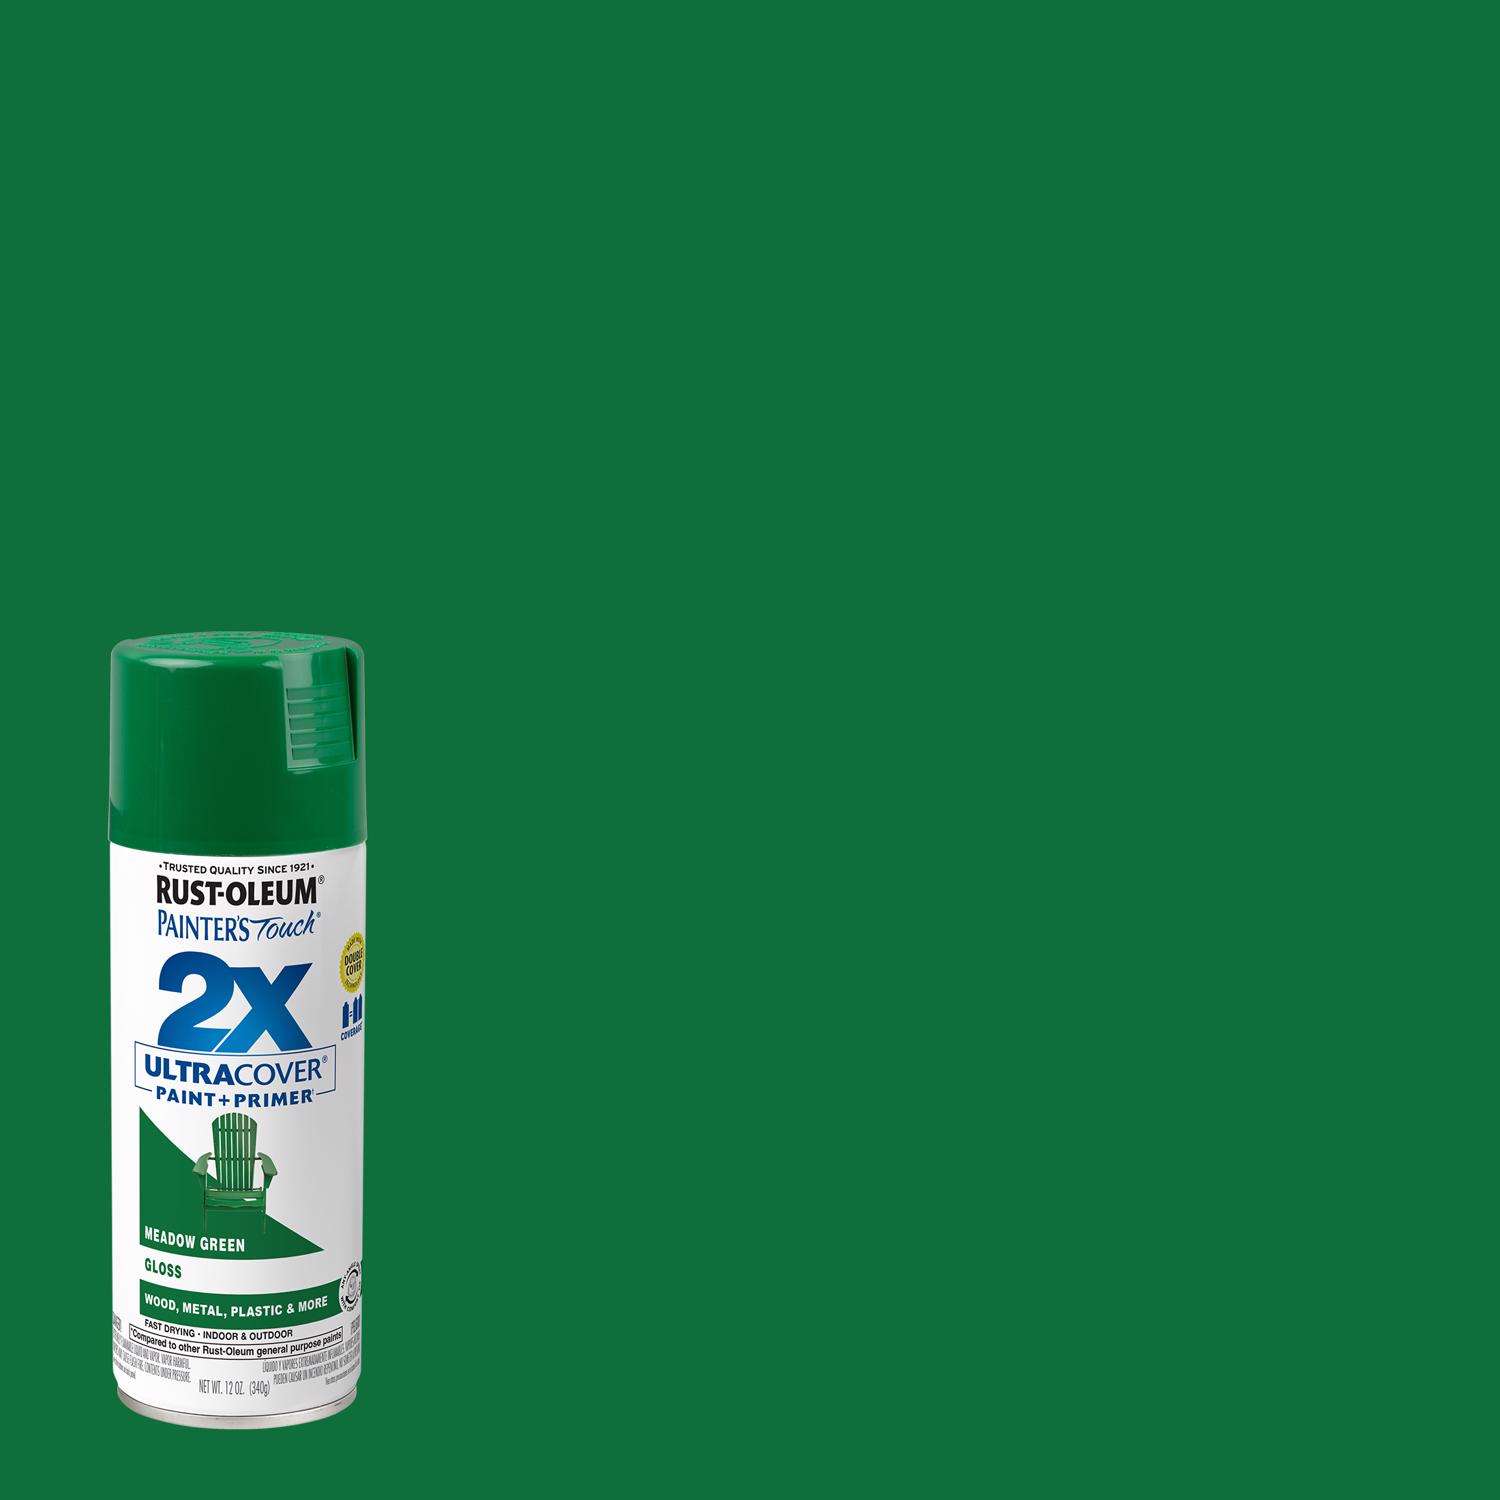 Rust-Oleum Painter's Touch 2X Ultra Cover Gloss Meadow Green Paint ...